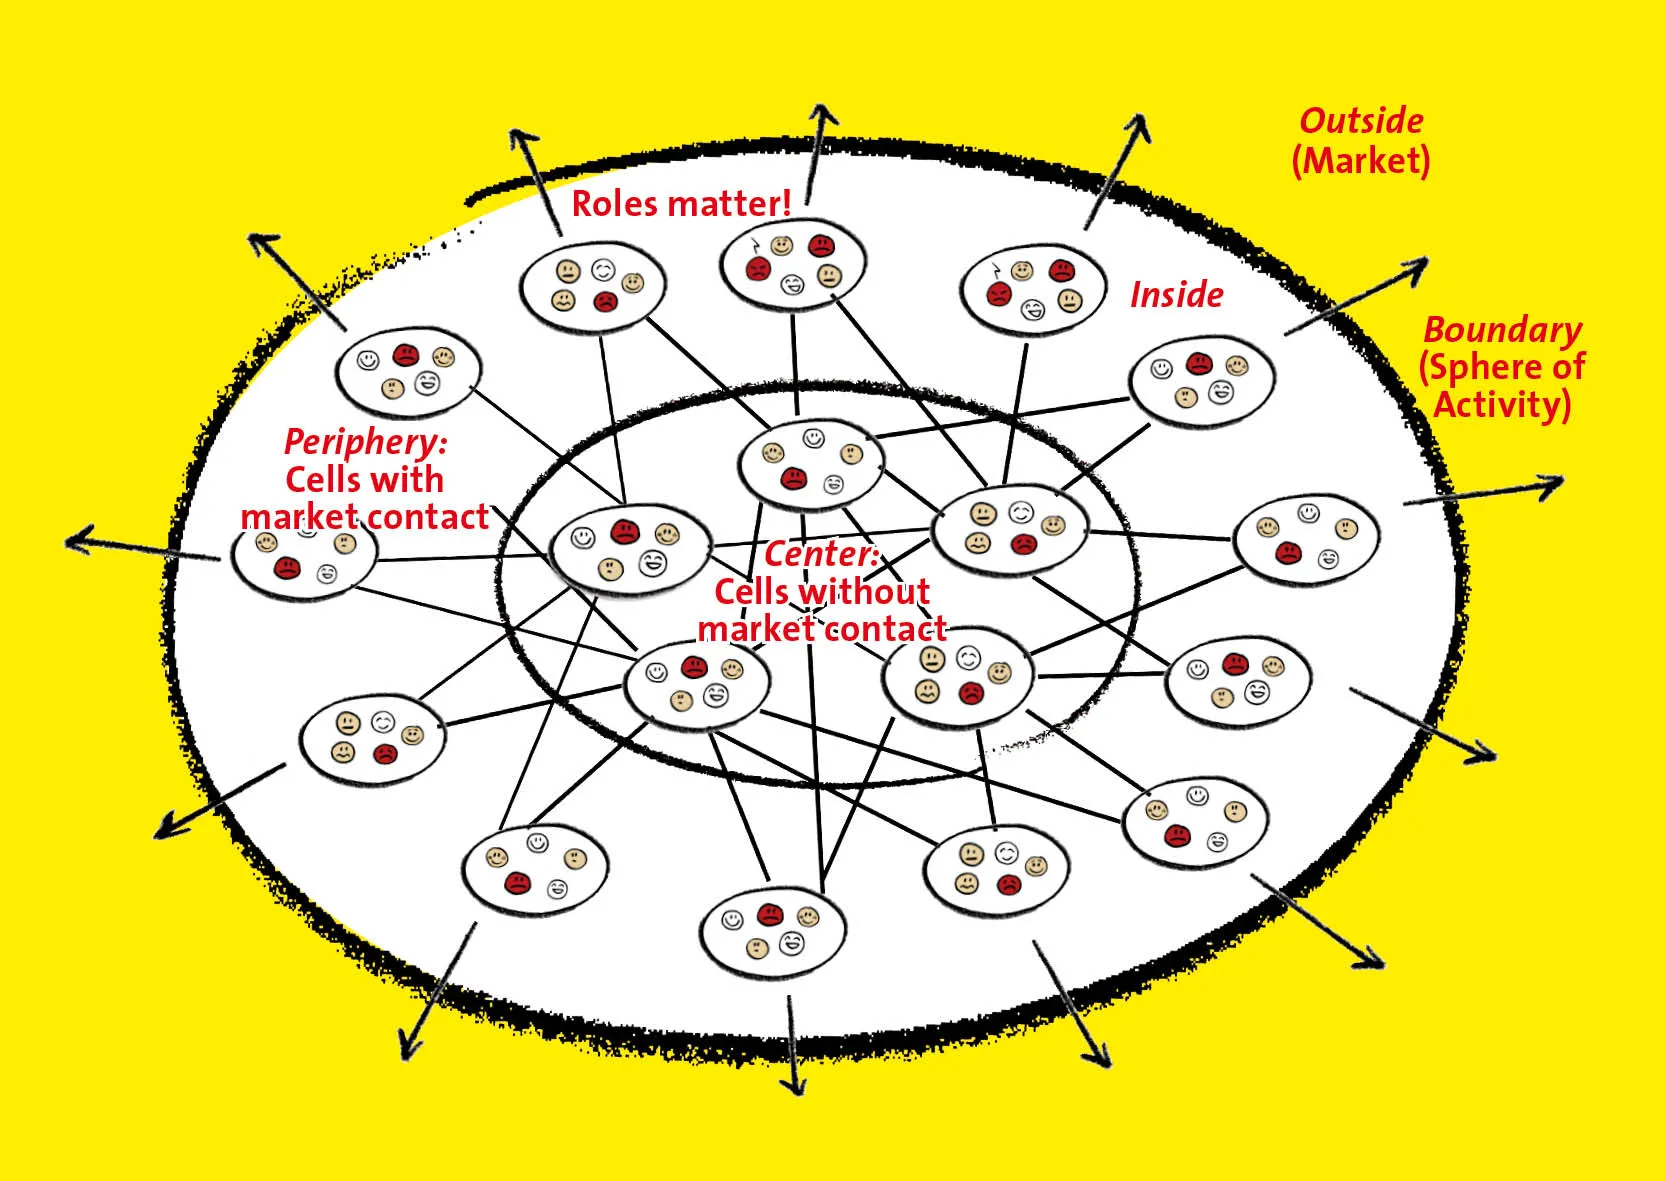 The BetaCodex structure groups shared service roles in the centre and operational or project teams at the periphery. This is one of many models you can use to group your roles. Image credit to BetaCodex.